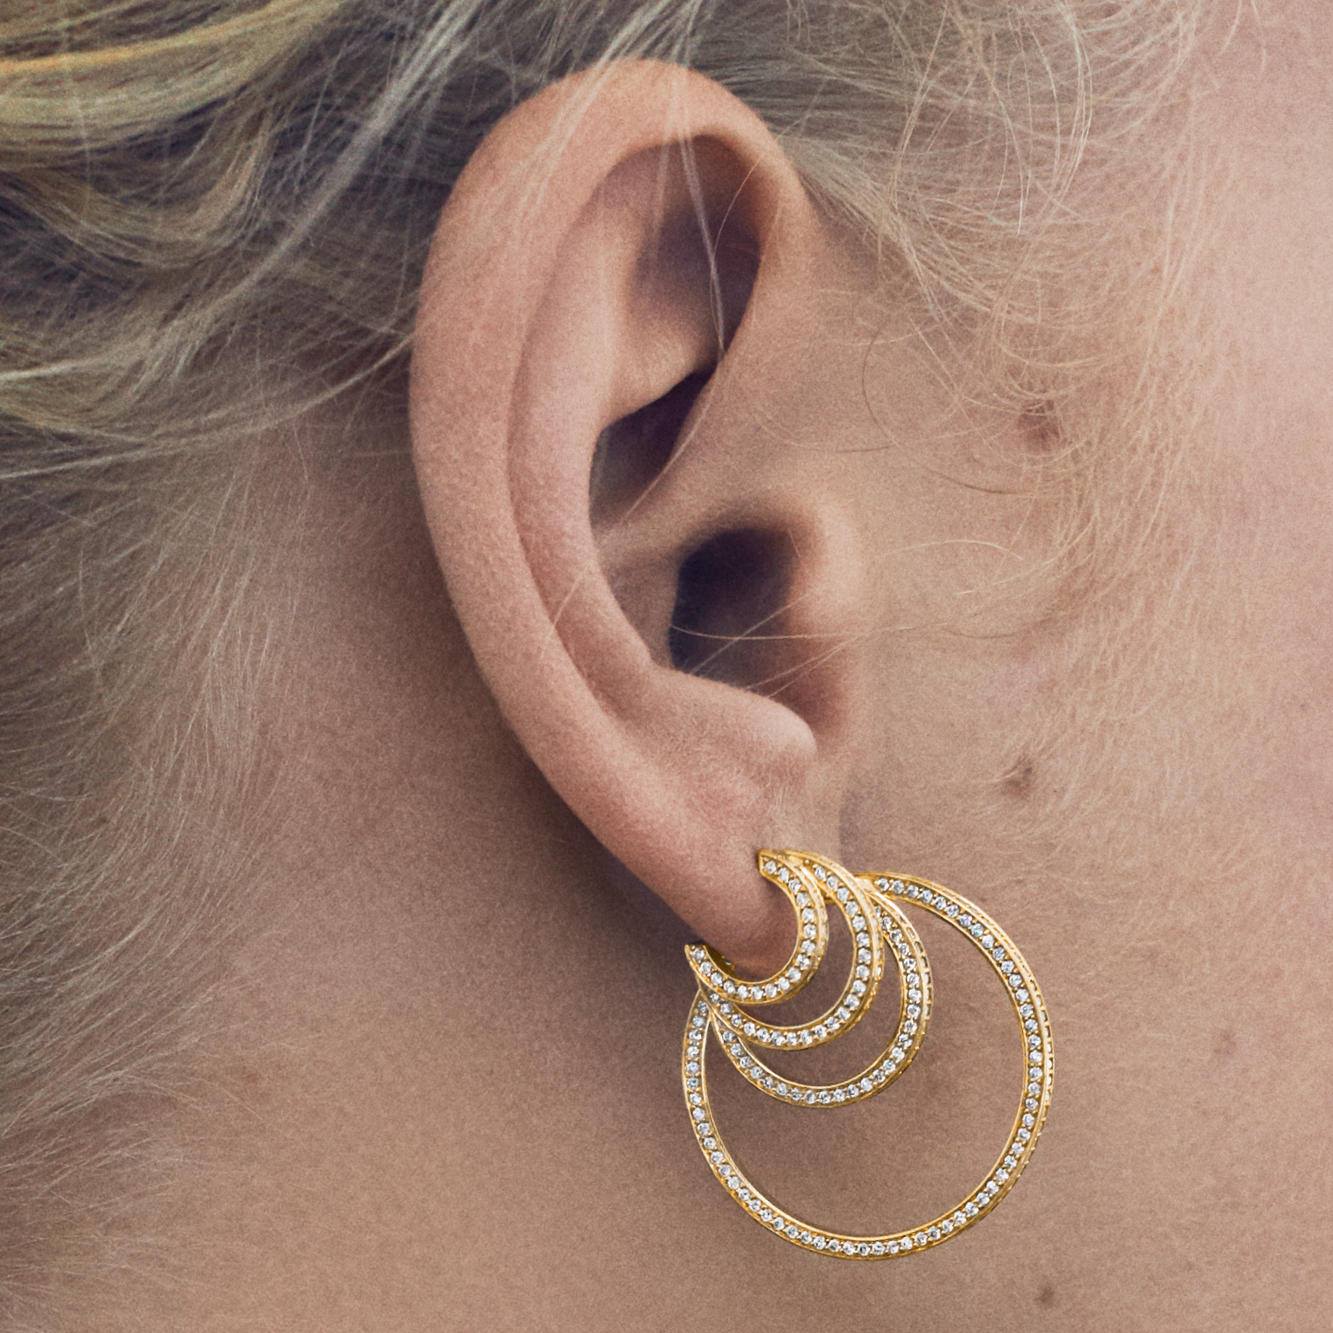 Precious with a refined touch, it is a contemporary collection of timeless gold-and-diamond hoop designs infused with the essence of effortless, Scandinavian simplicity. Designed by @SophieBilleBraheltd. Explore the collection at: